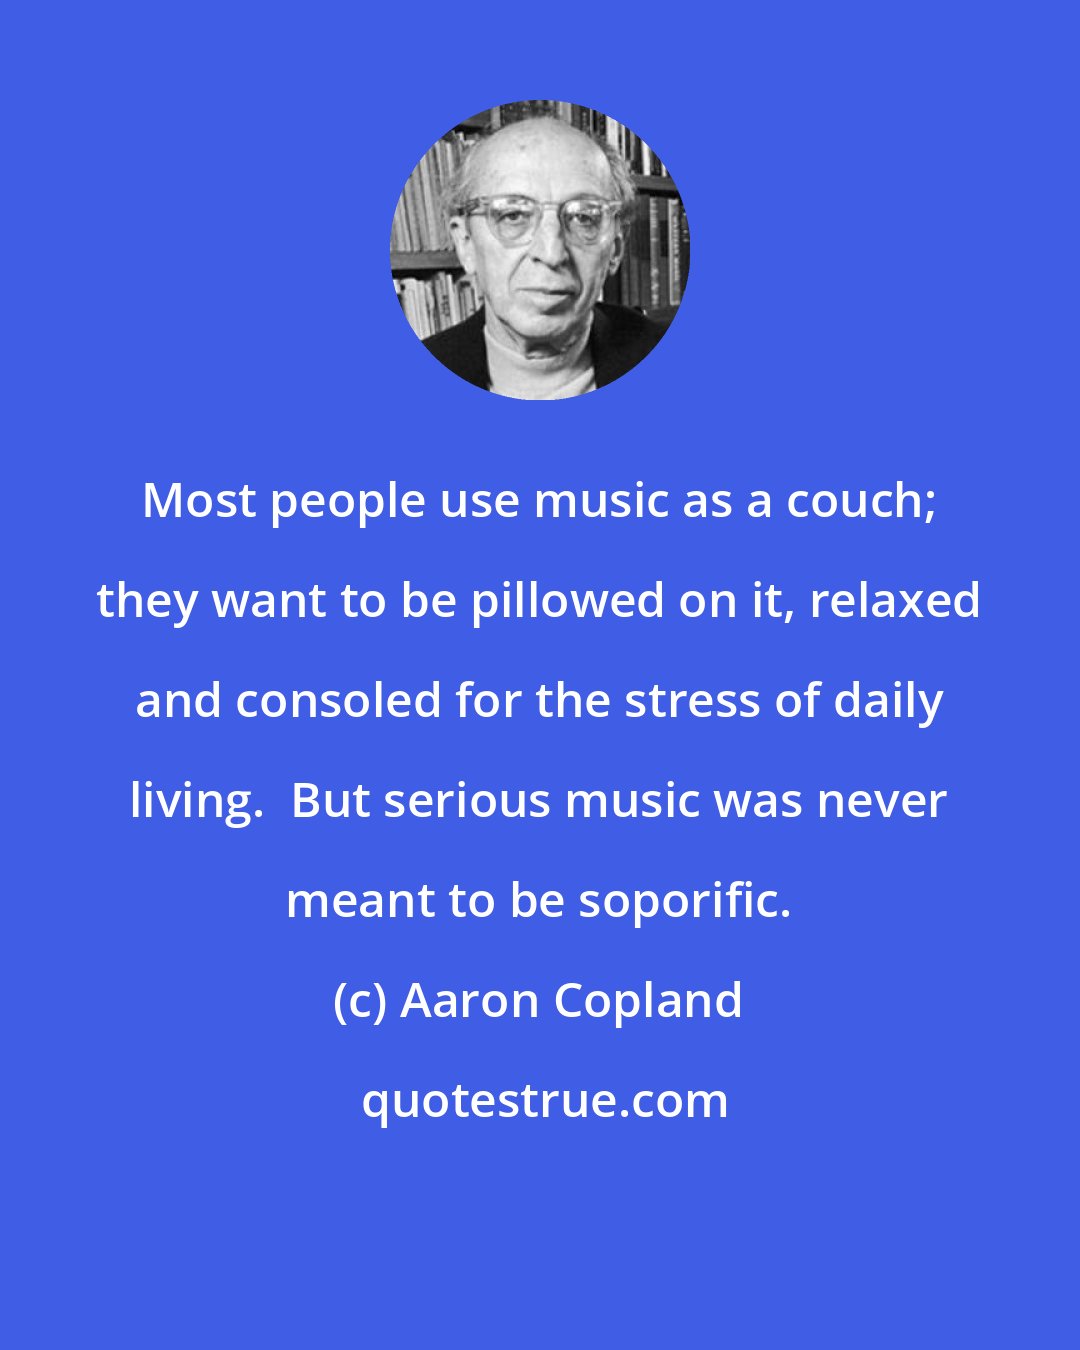 Aaron Copland: Most people use music as a couch; they want to be pillowed on it, relaxed and consoled for the stress of daily living.  But serious music was never meant to be soporific.